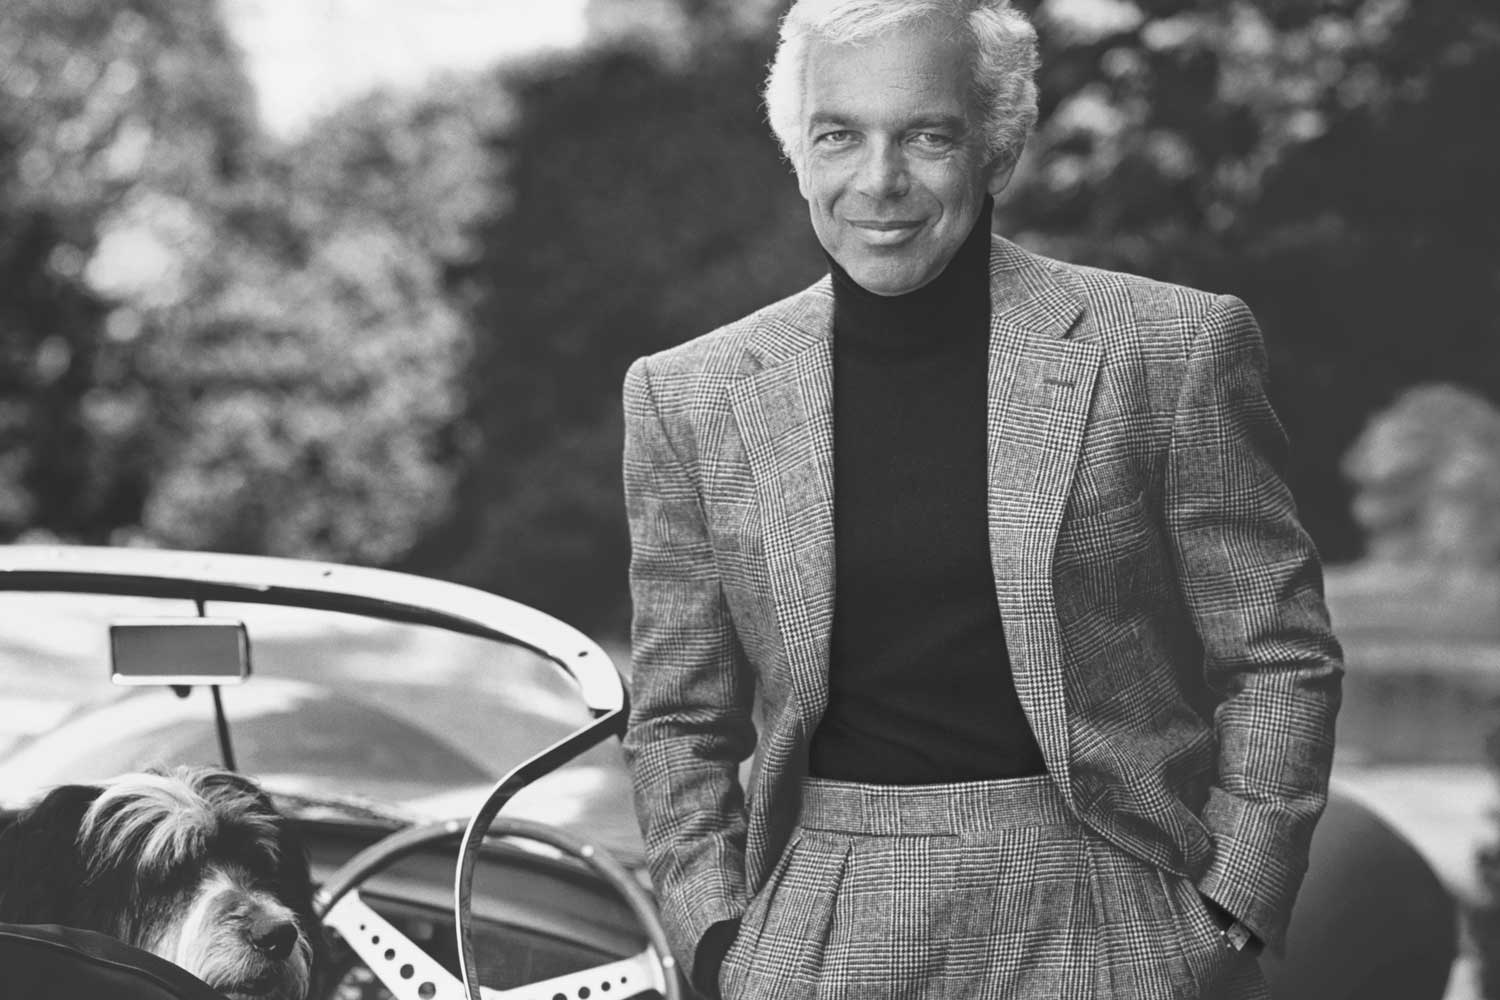 Ralph Lauren at his Bedford, NY estate with his Cartier Tank peeking out from under his jacket sleeve (Image: Bruce Weber, 1998)